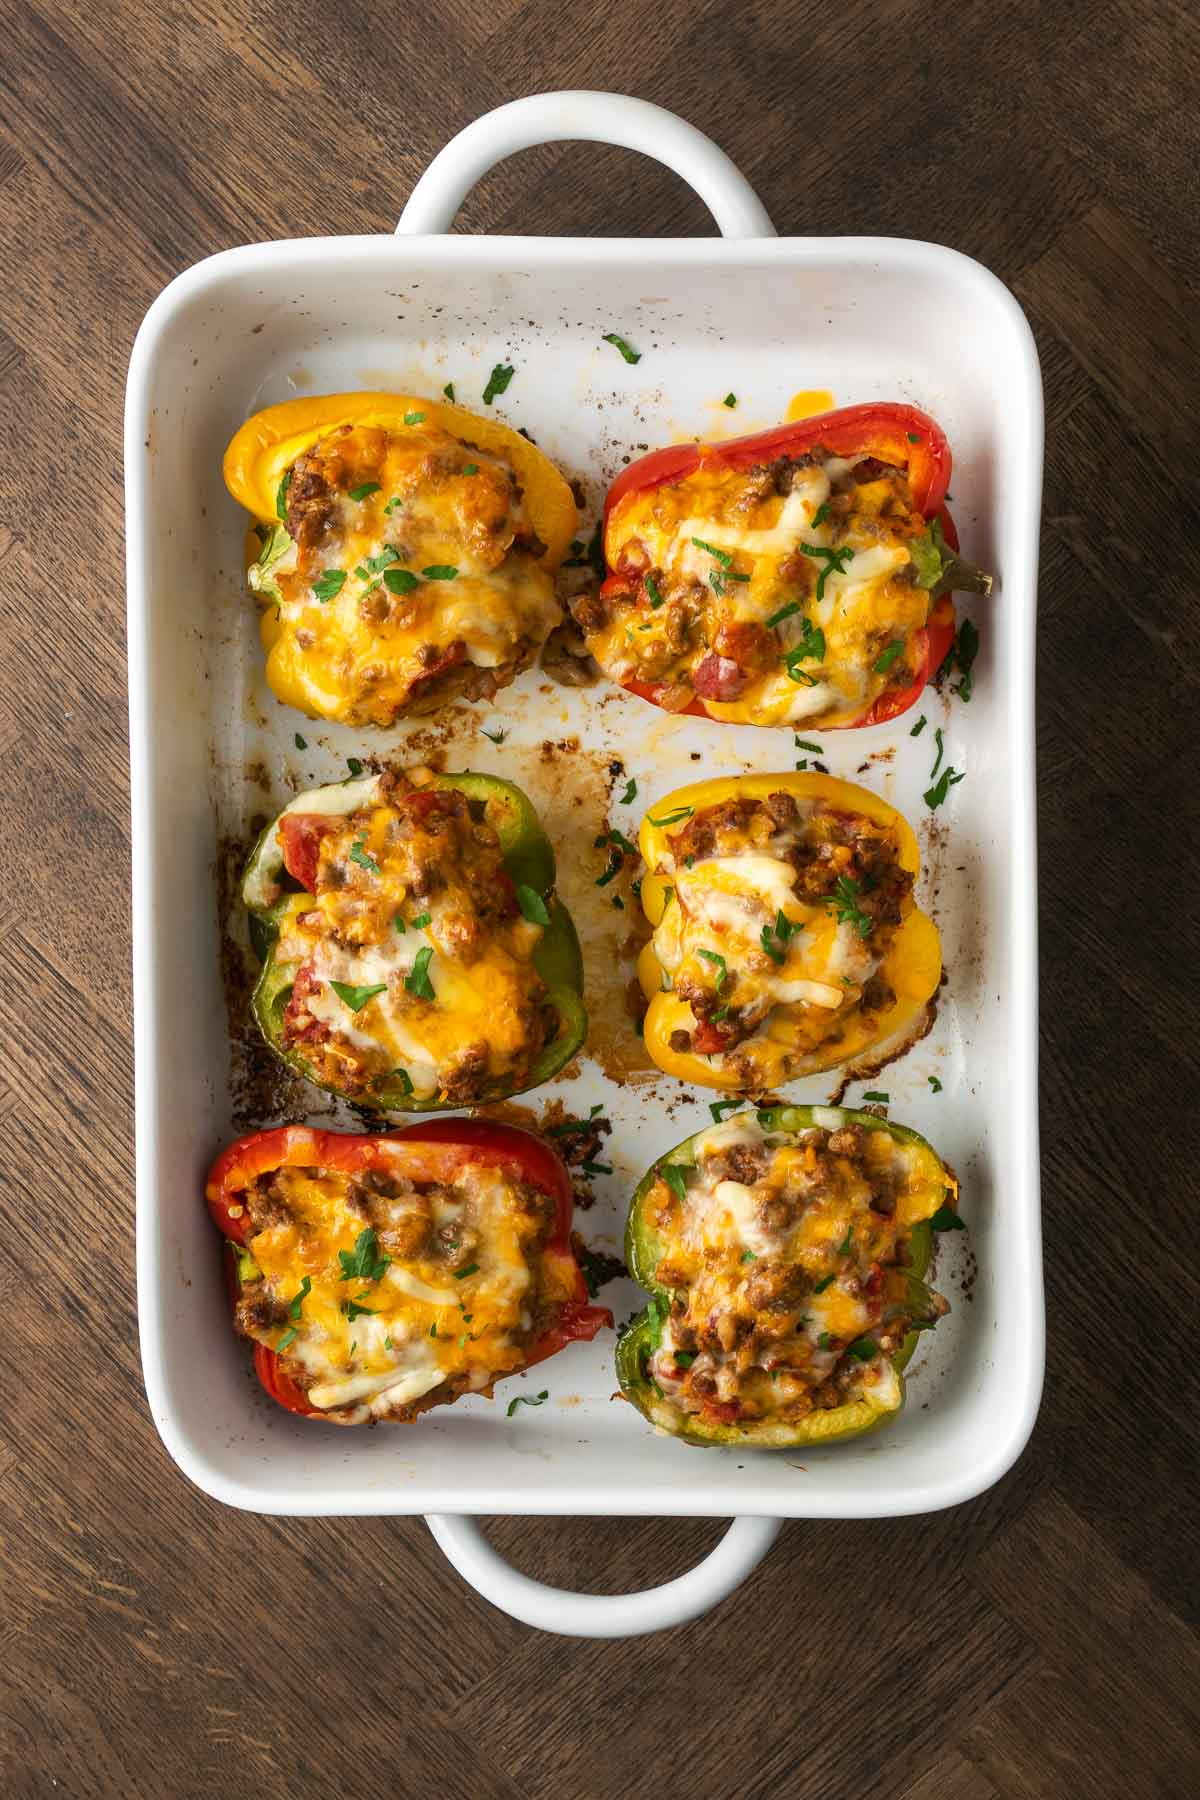 Baking dish full of Keto Stuffed Peppers topped with cheese.